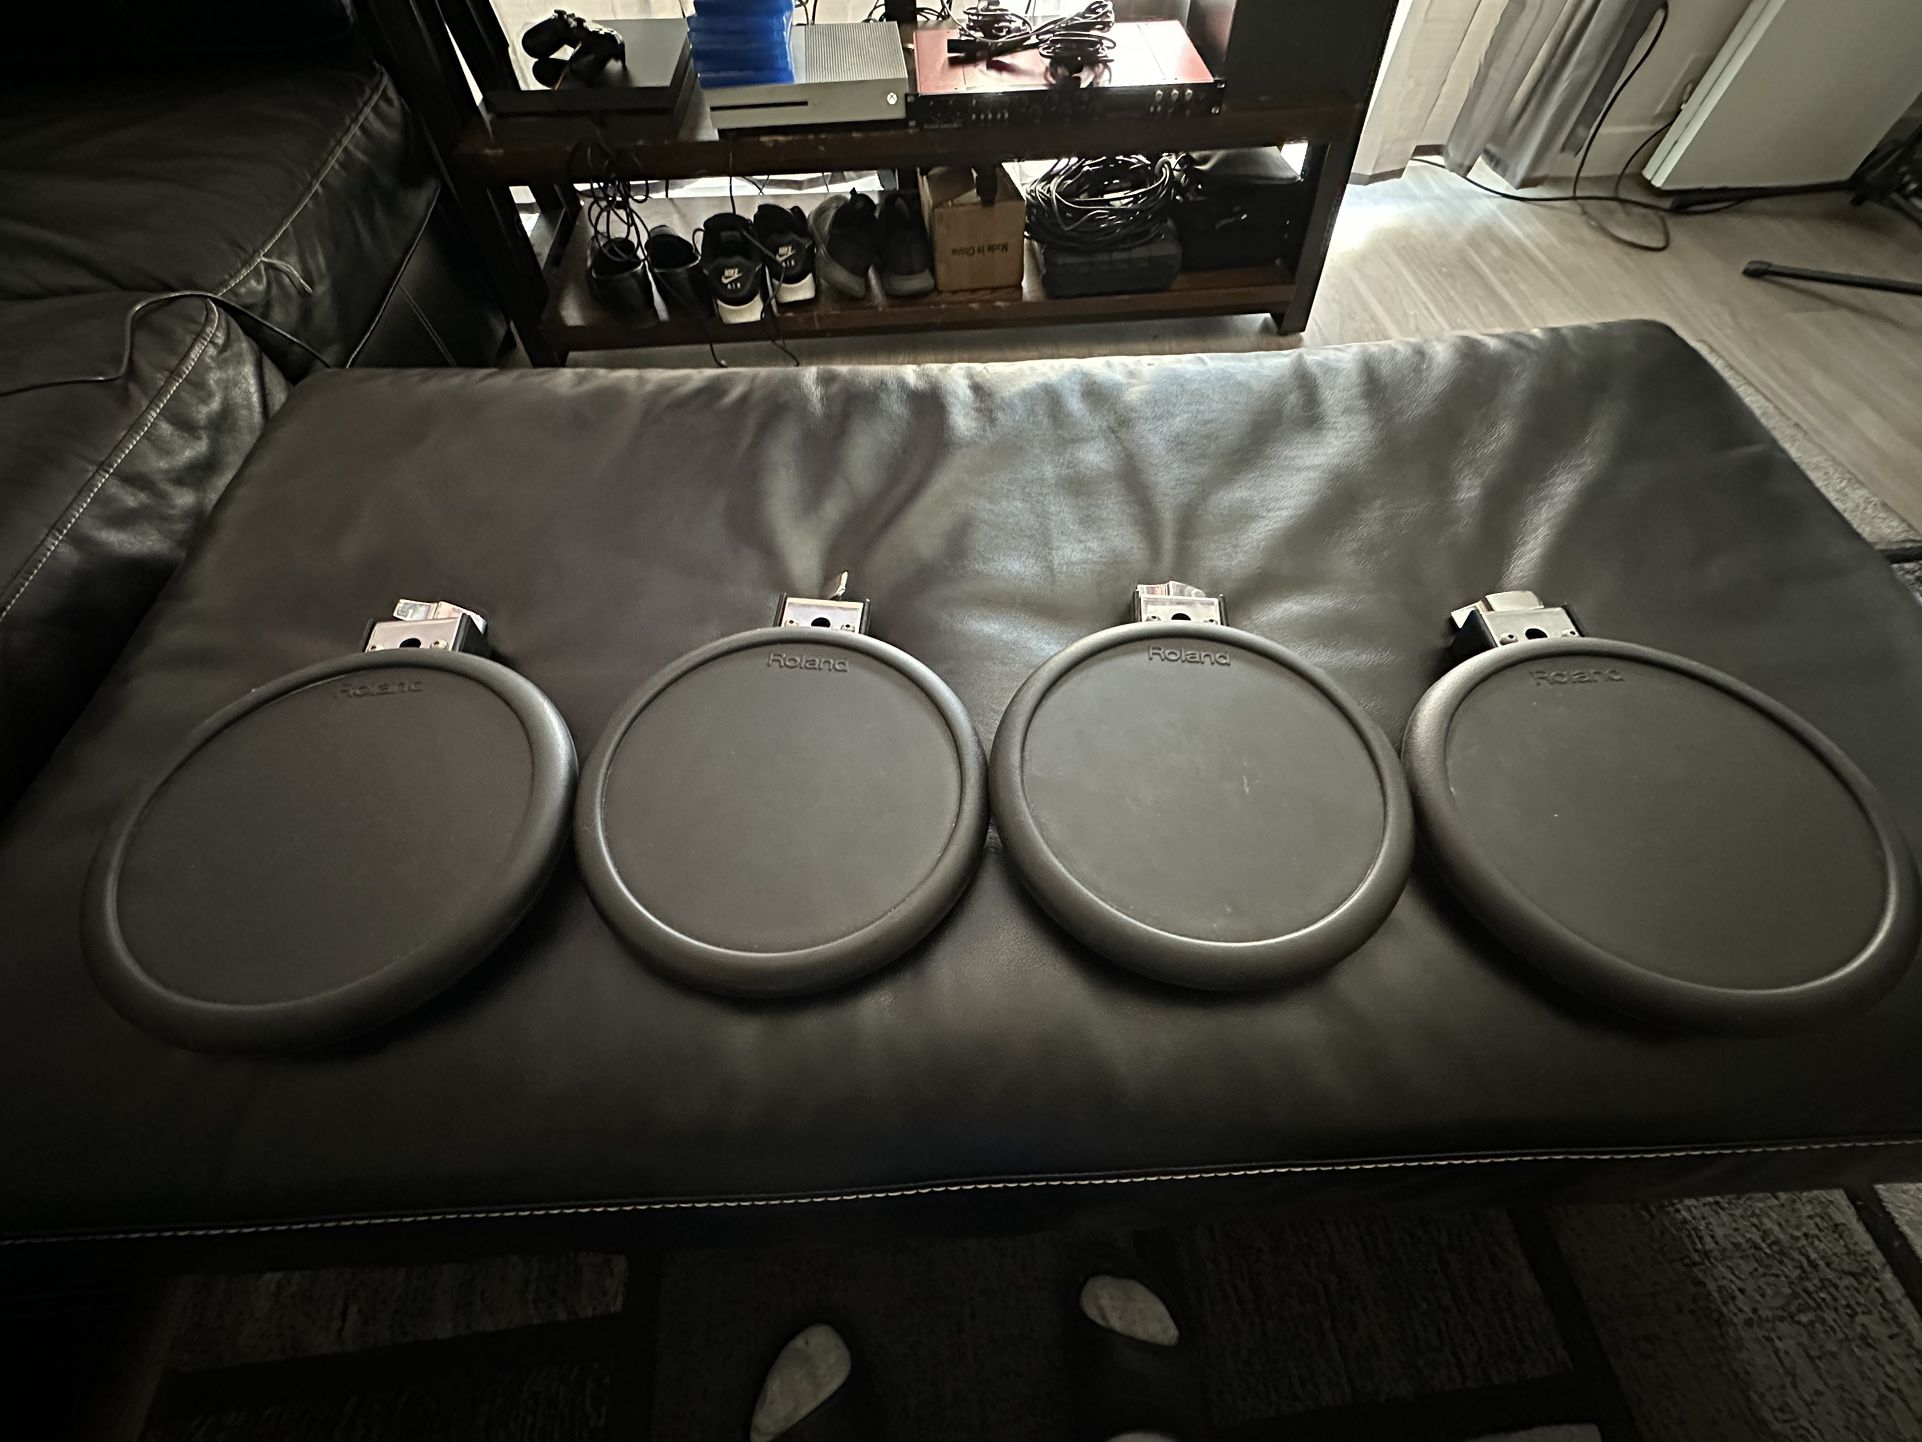 Sale Set Of 4 Roland Pd-8 Drum Pads All Good Working Condition $170 All 4 Price Firm 